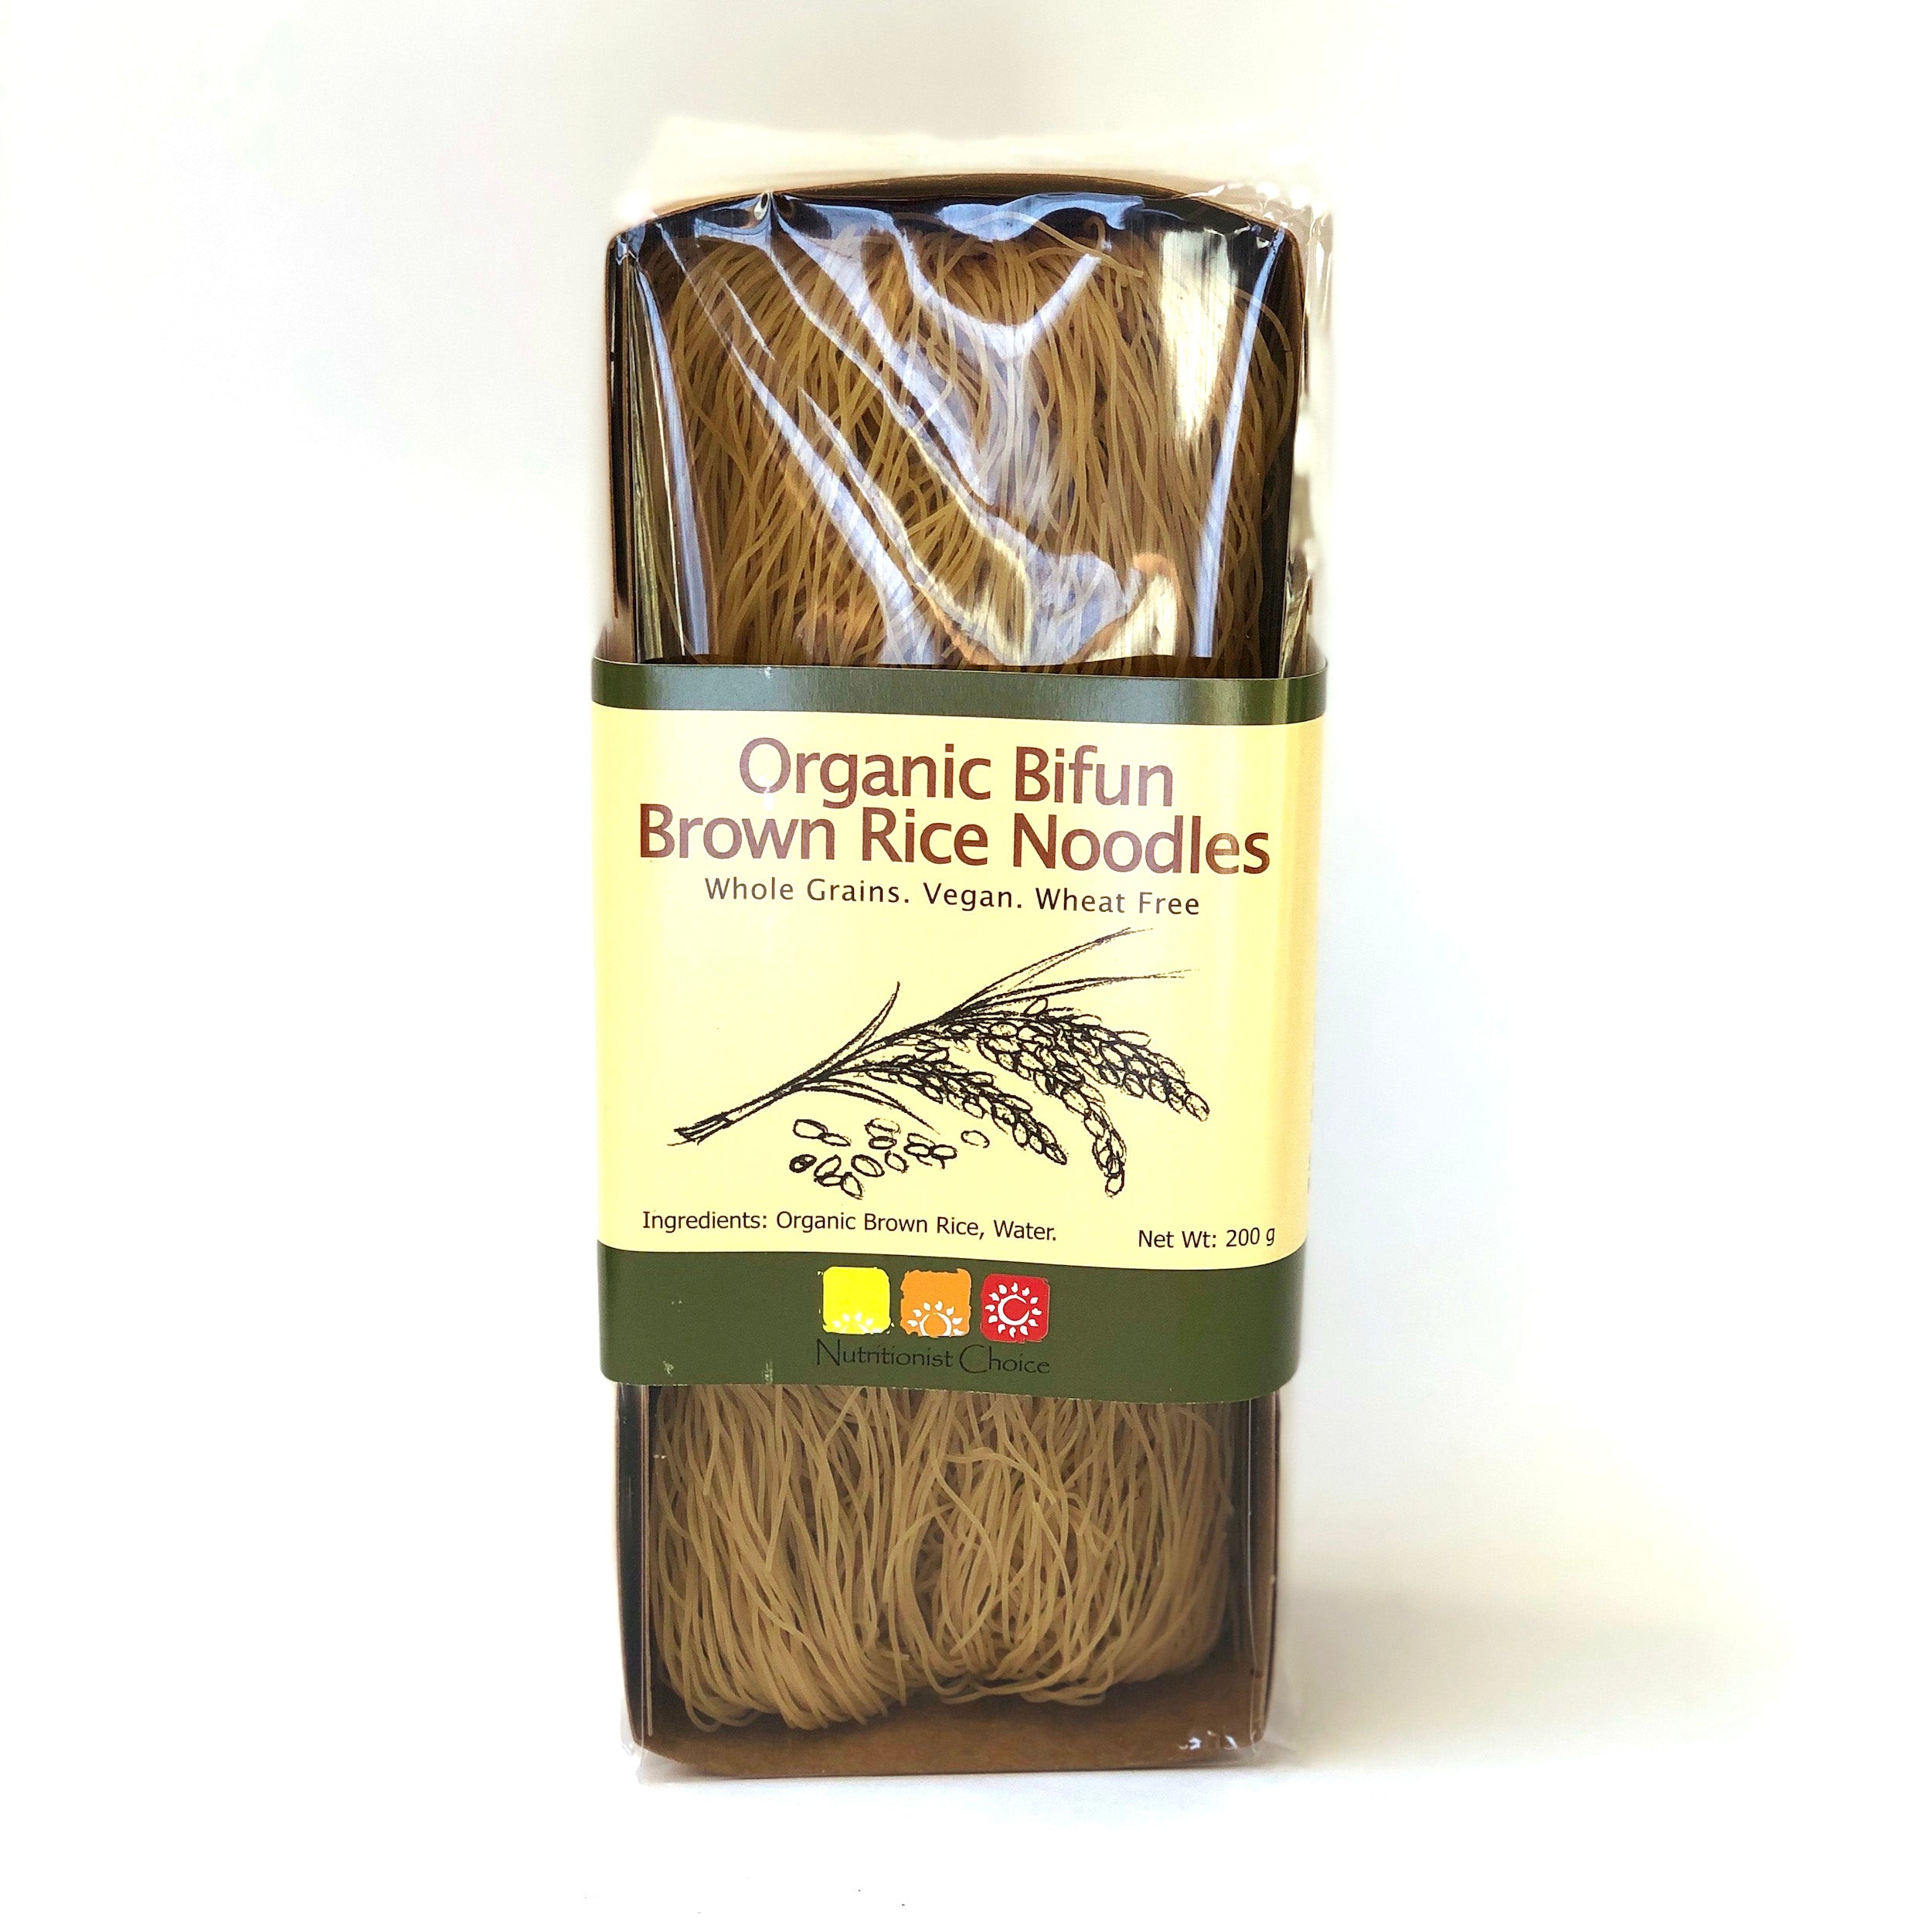 Nutritionist Choice Organic Bifun Brown Rice Noodles-The Living Co.